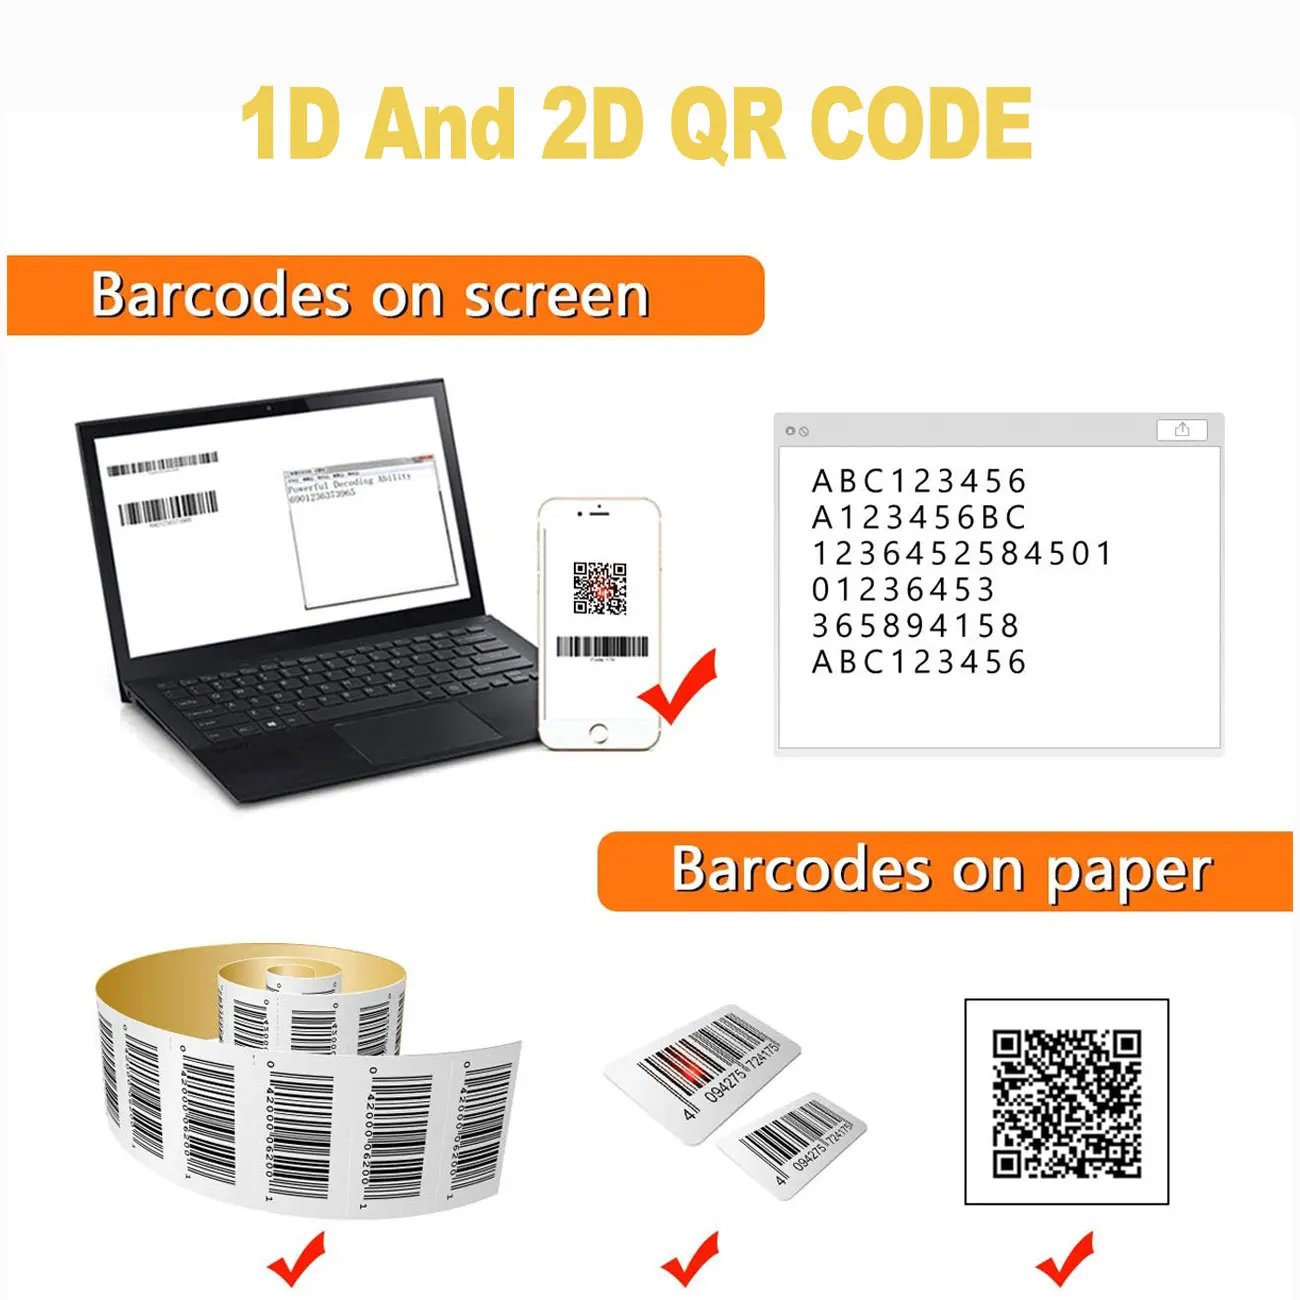 2D Bluetooth Barcode Scanner Wired Scanner 2.4G Wireless Barcode Scanner 2D Handheld Barcode Reader QR Code PDF images - 6